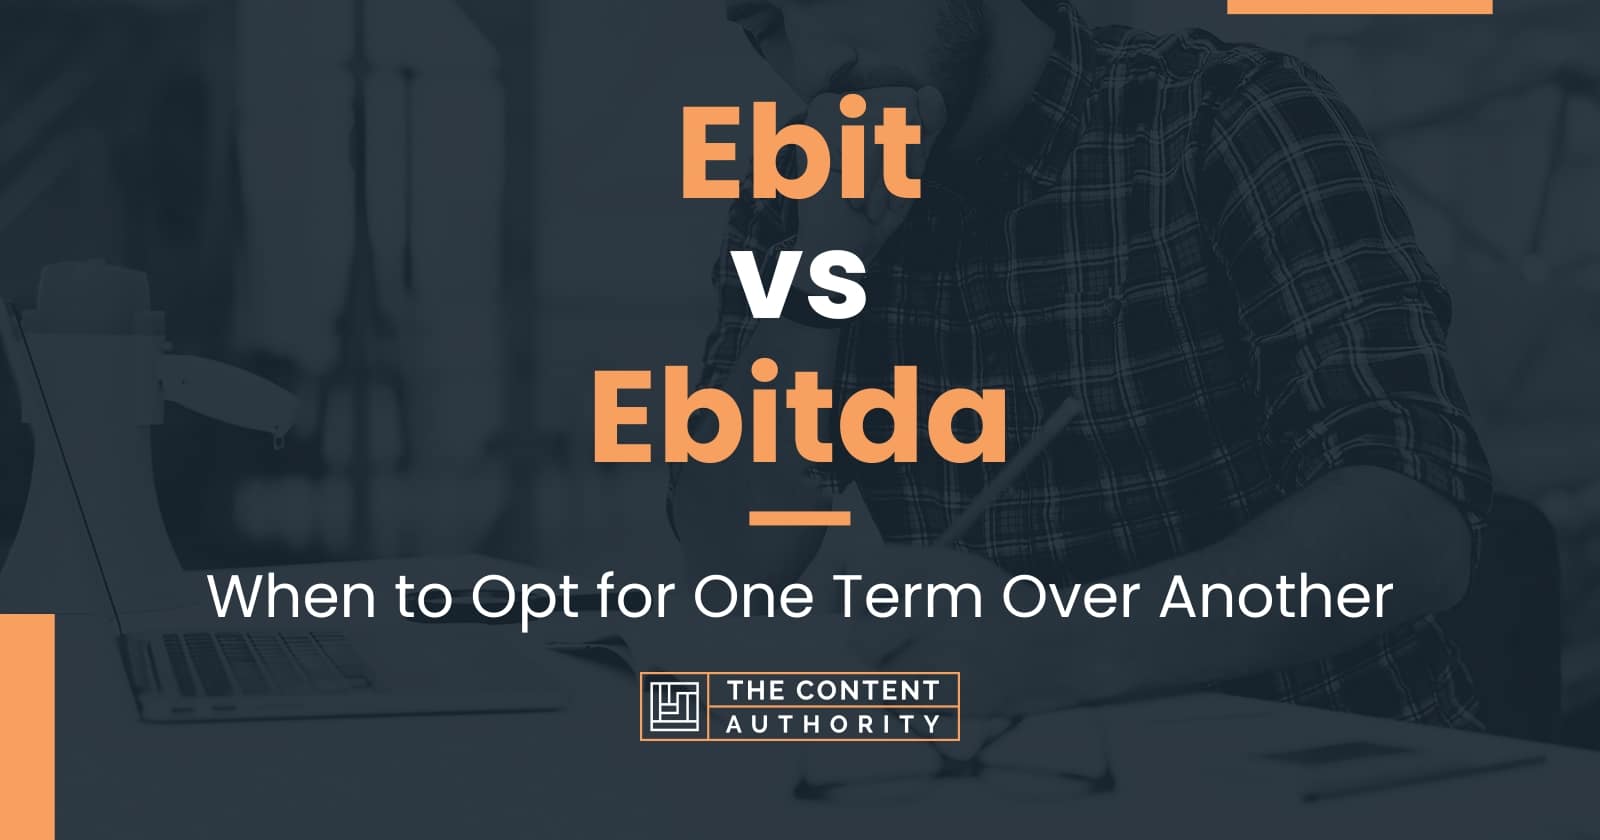 Ebit Vs Ebitda When To Opt For One Term Over Another 3408